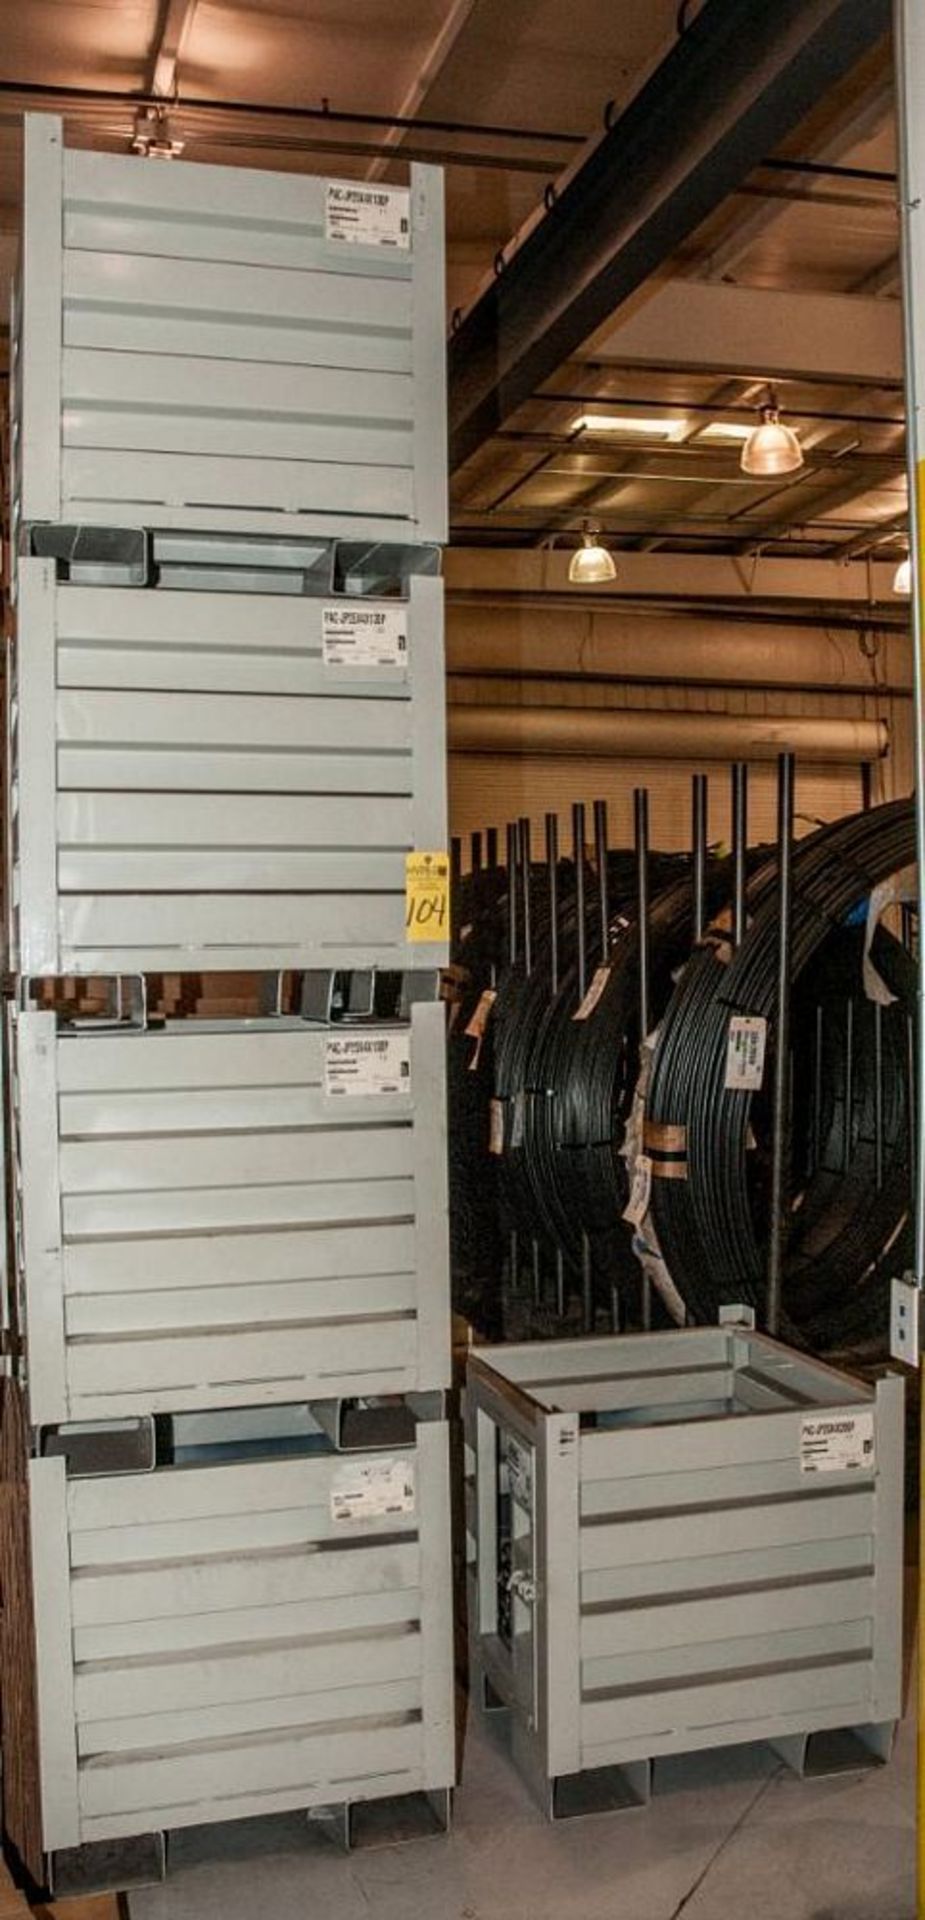 (5) Steel Stacking Bins with Door, OD Approx. 29 1/2" x 29 1/2" x 32" Tall, W/ any contents Coil Spr